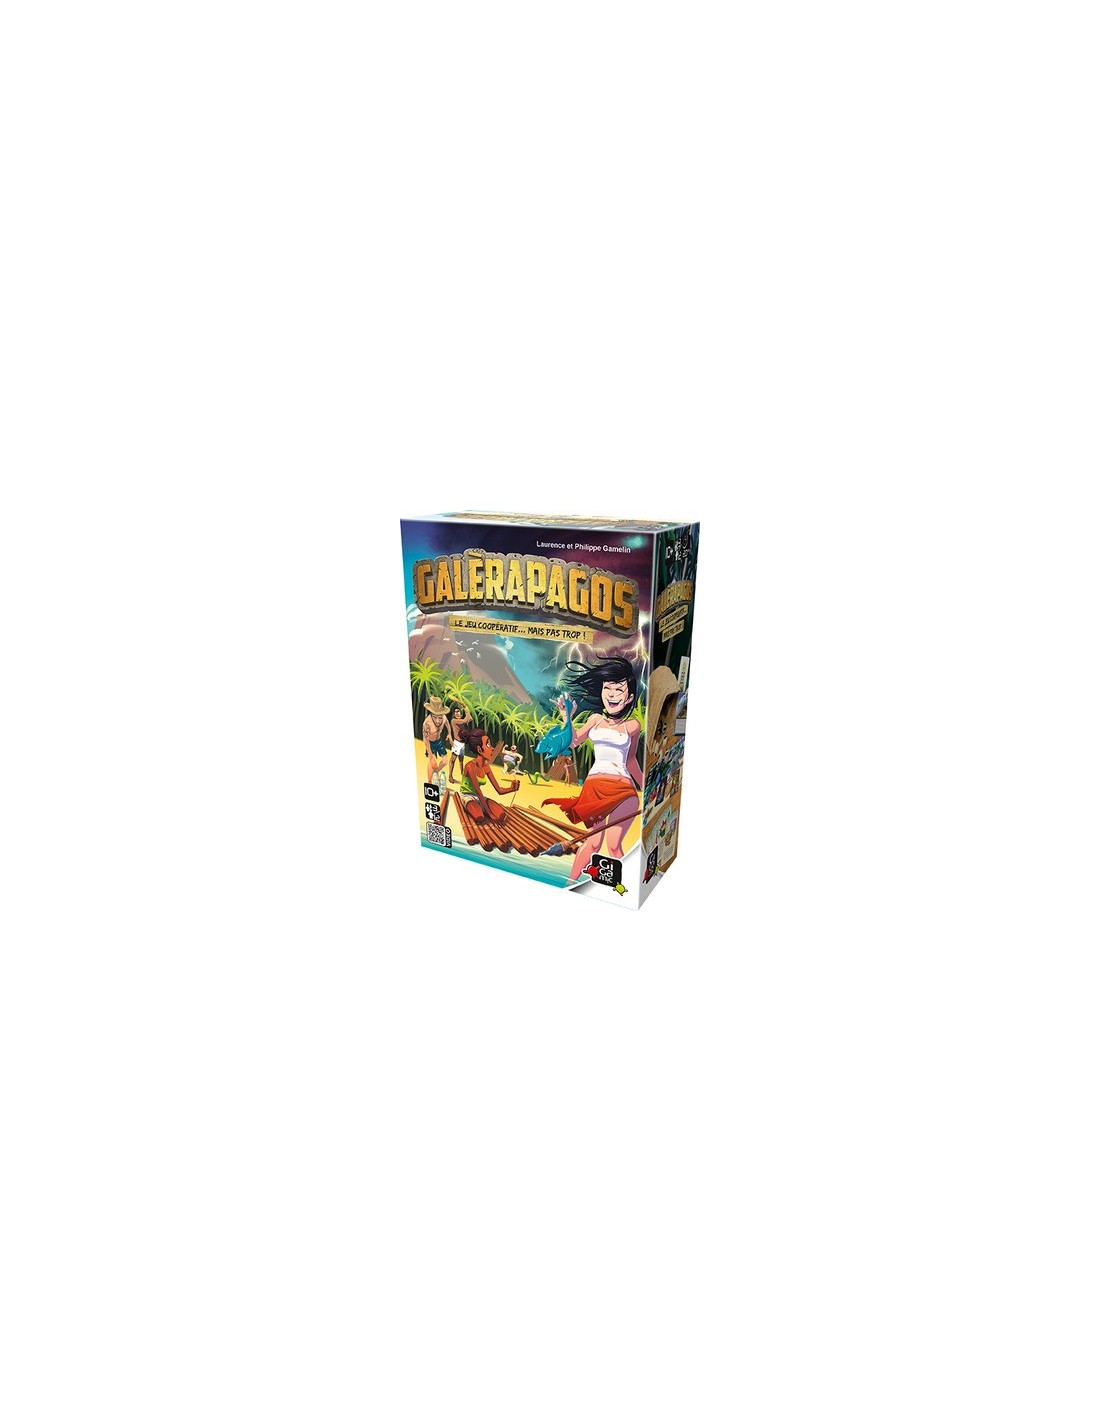 Jeu d'ambiance Gigamic Galerapagos - Jeux d'ambiance - Achat